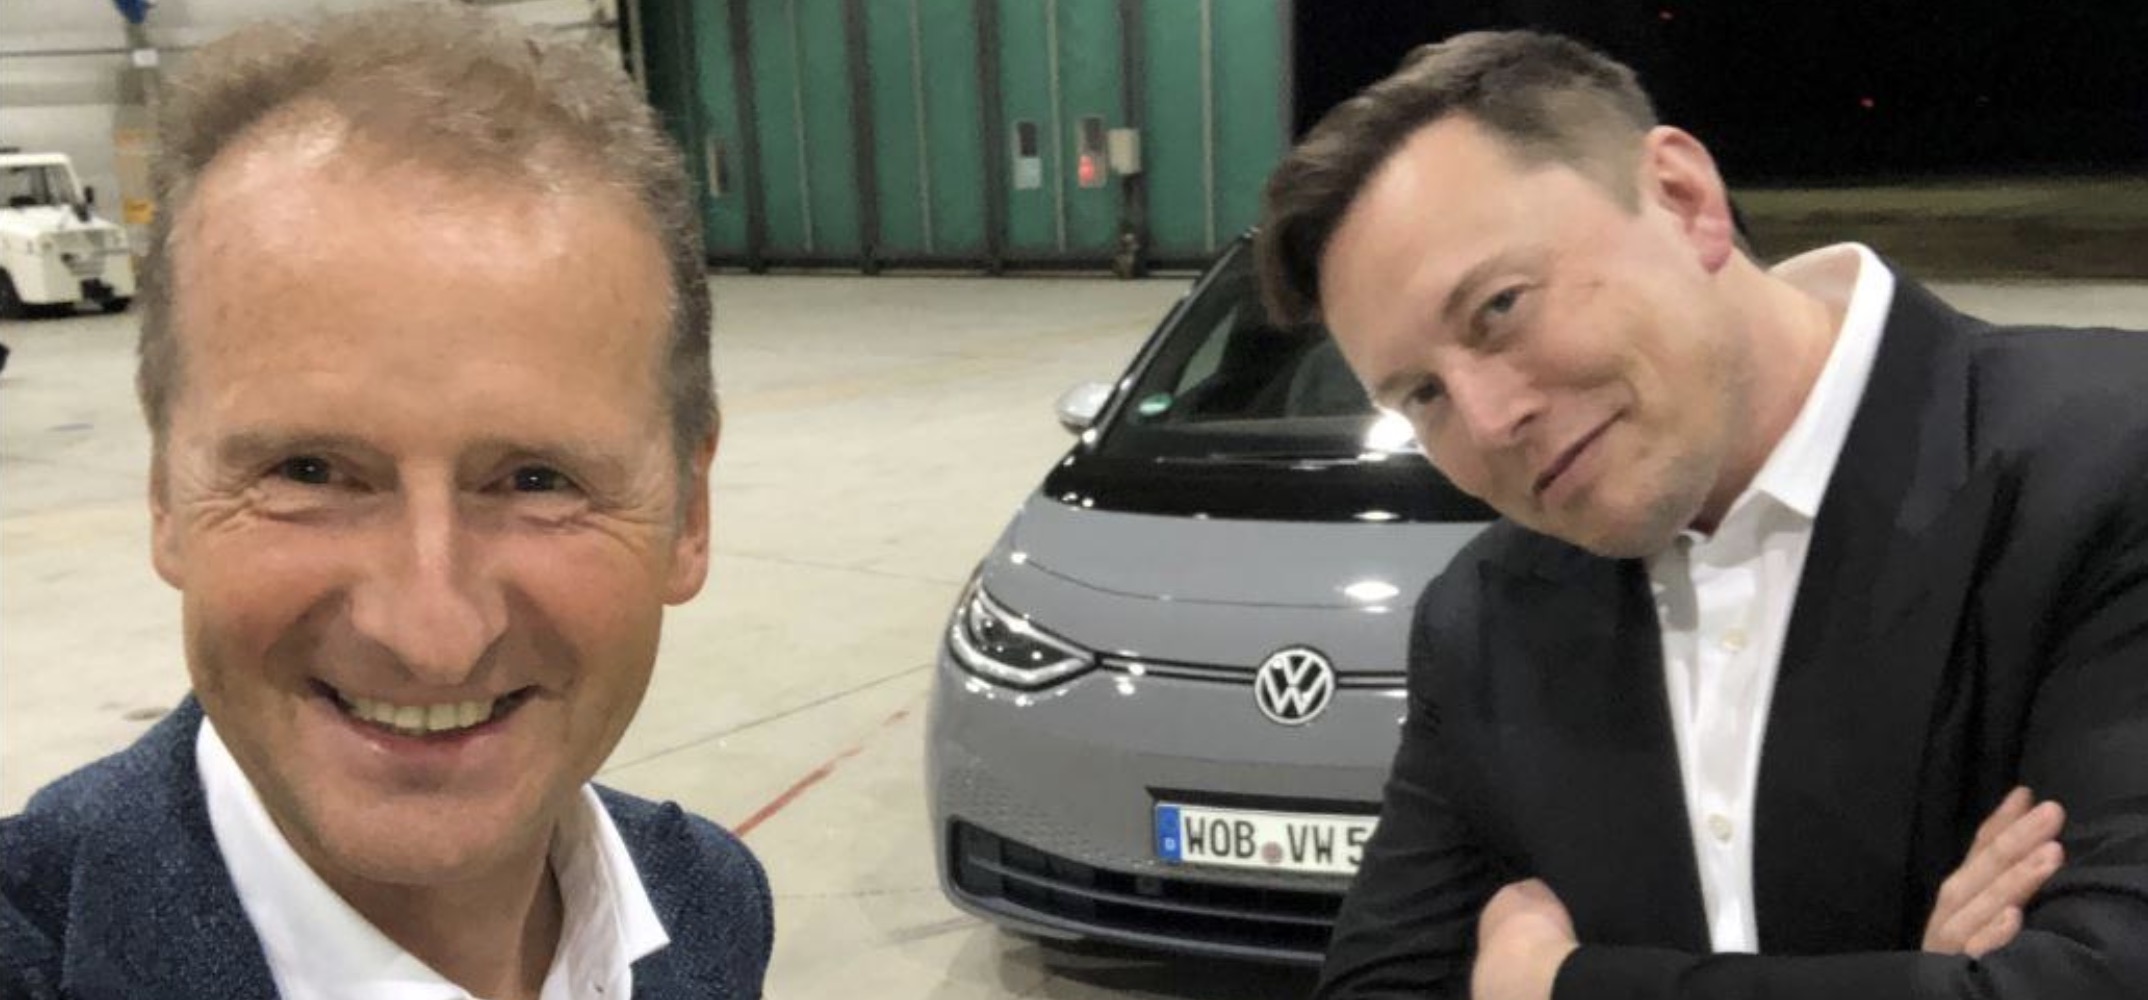 vw ceo herbert ss invites elon musk to talk on how tesla innovates quickly